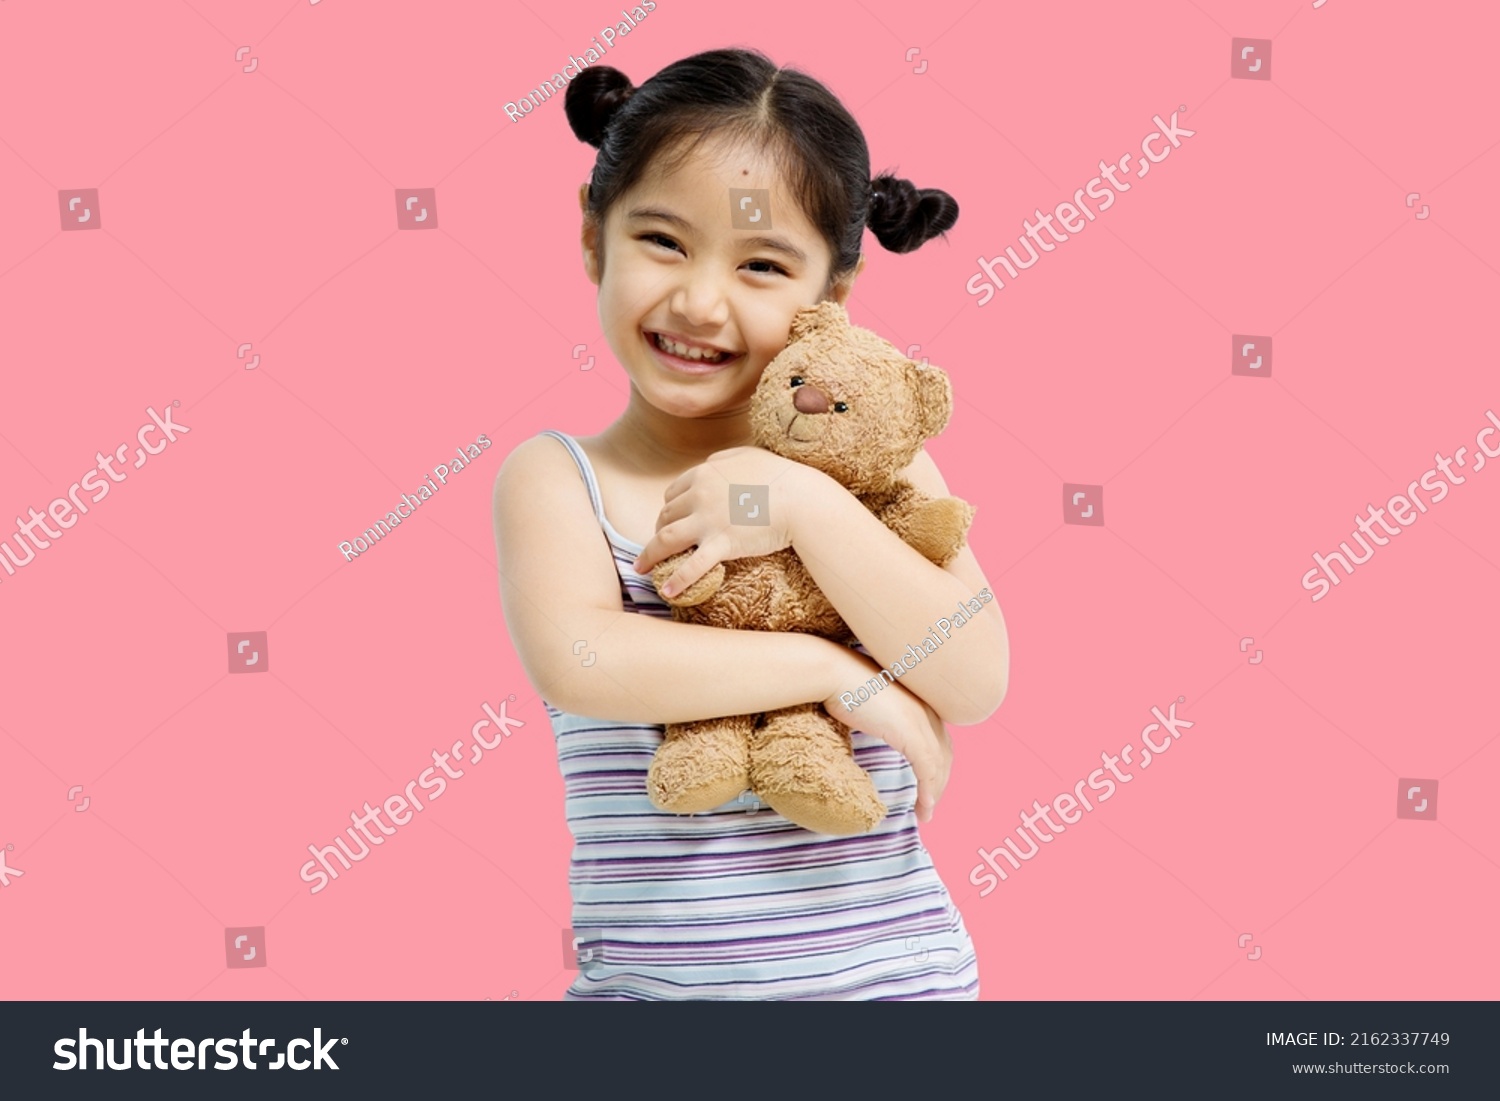 Asian cute little Asian child girl hugging teddy bear isolated on pink background. #2162337749